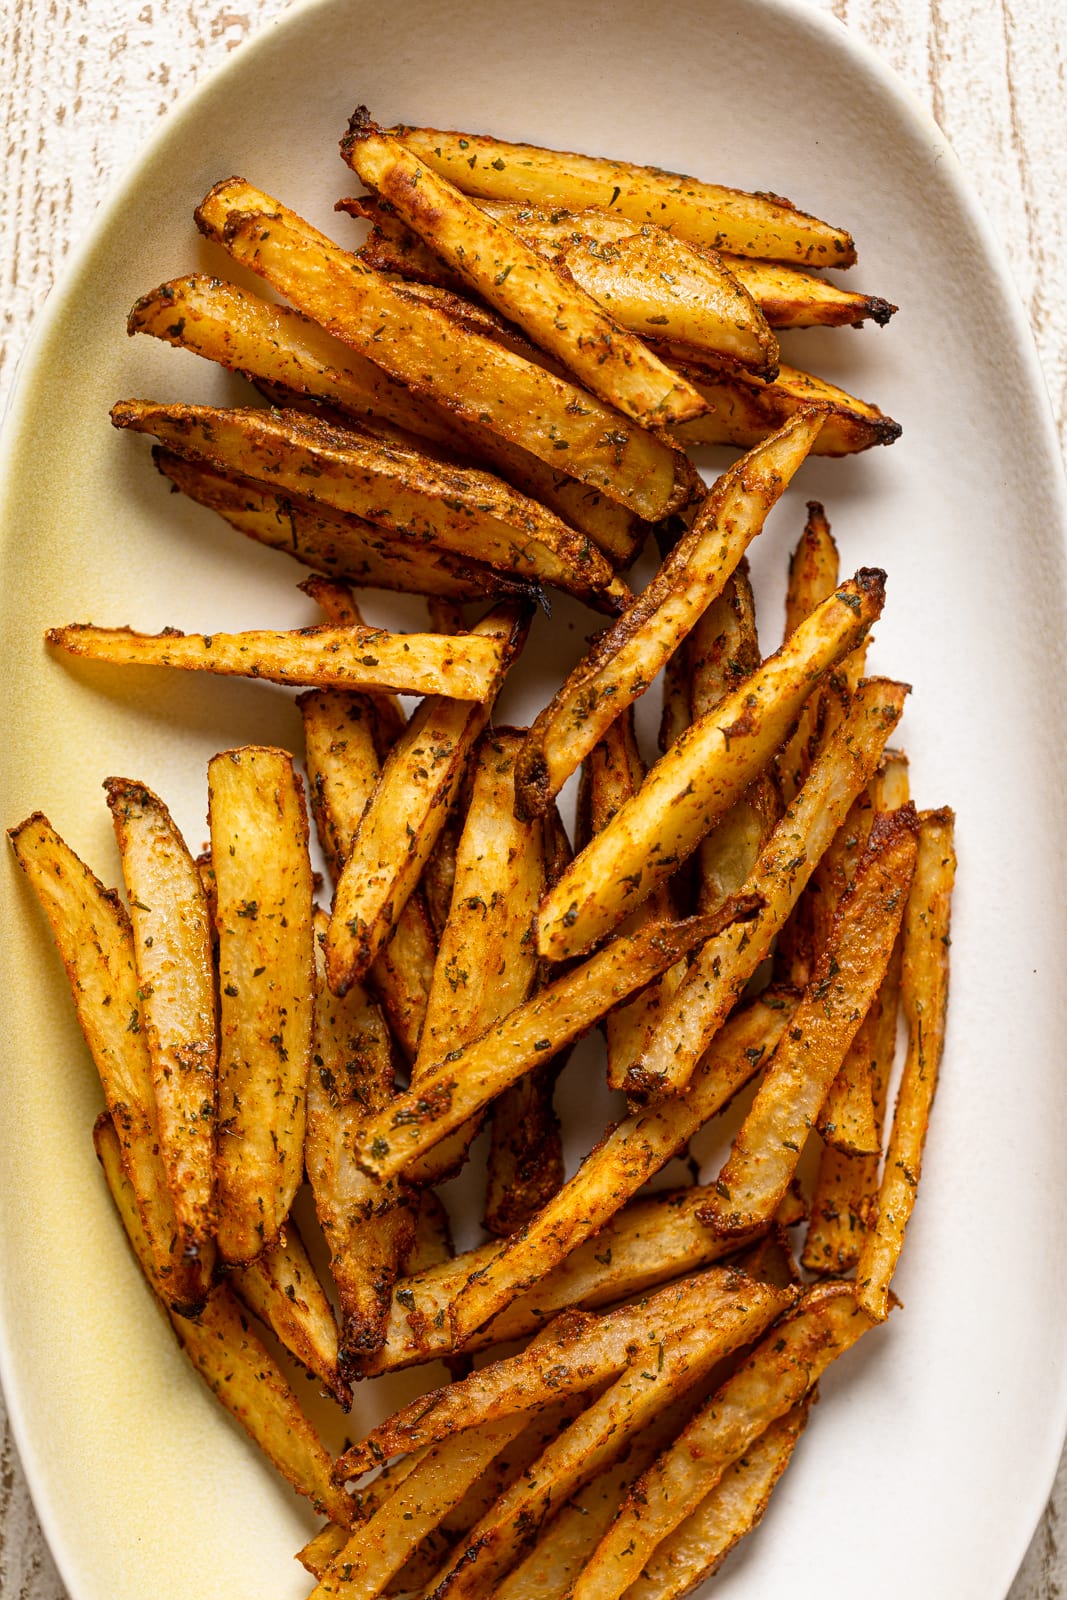 Plate of Seasoned French Fries